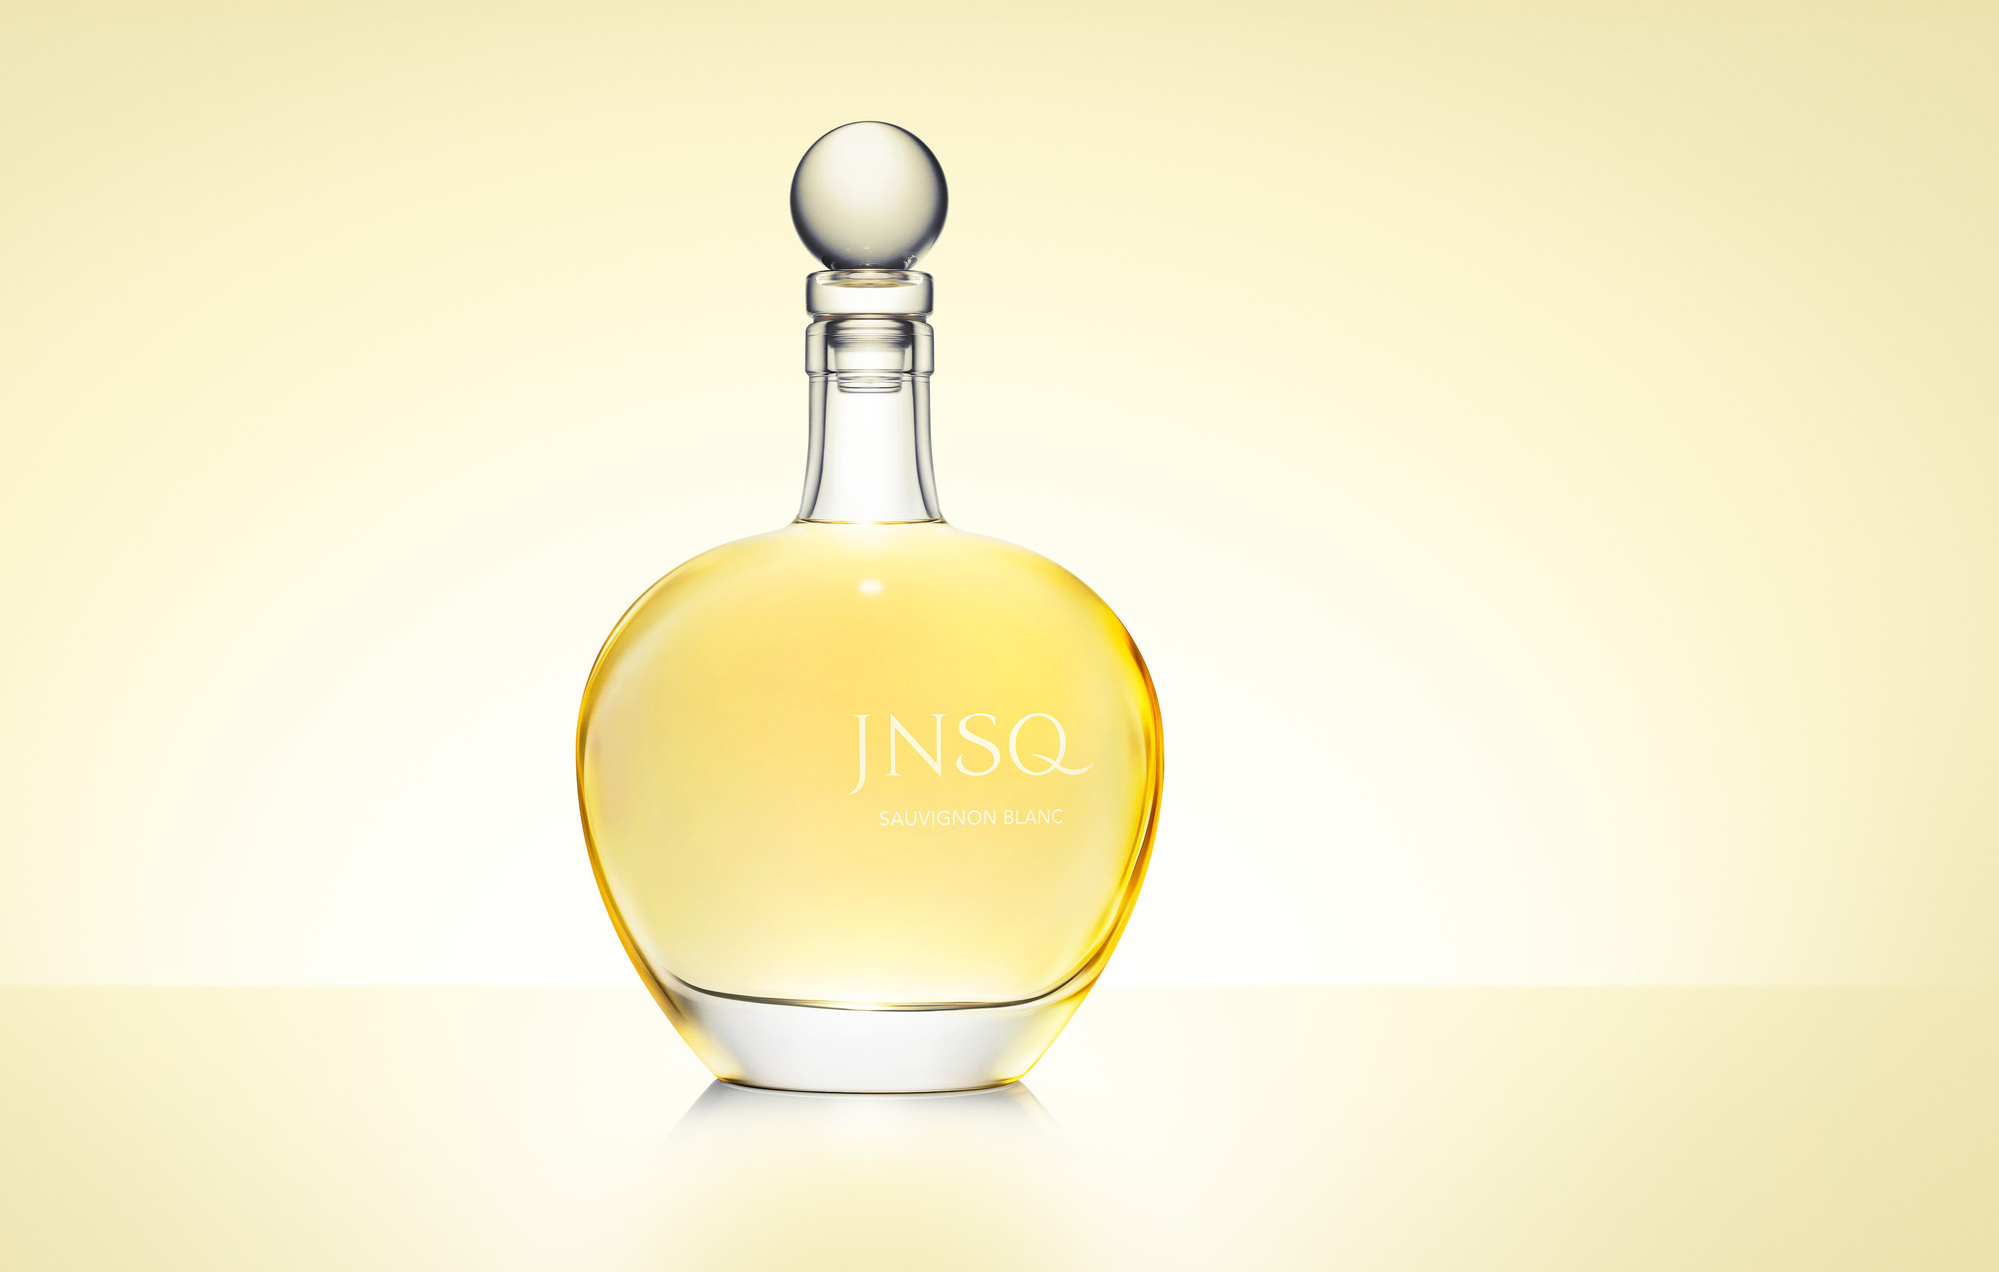 JNSQ wine bottle product and advertising photography by Timothy Hogan Studio in Los Angeles